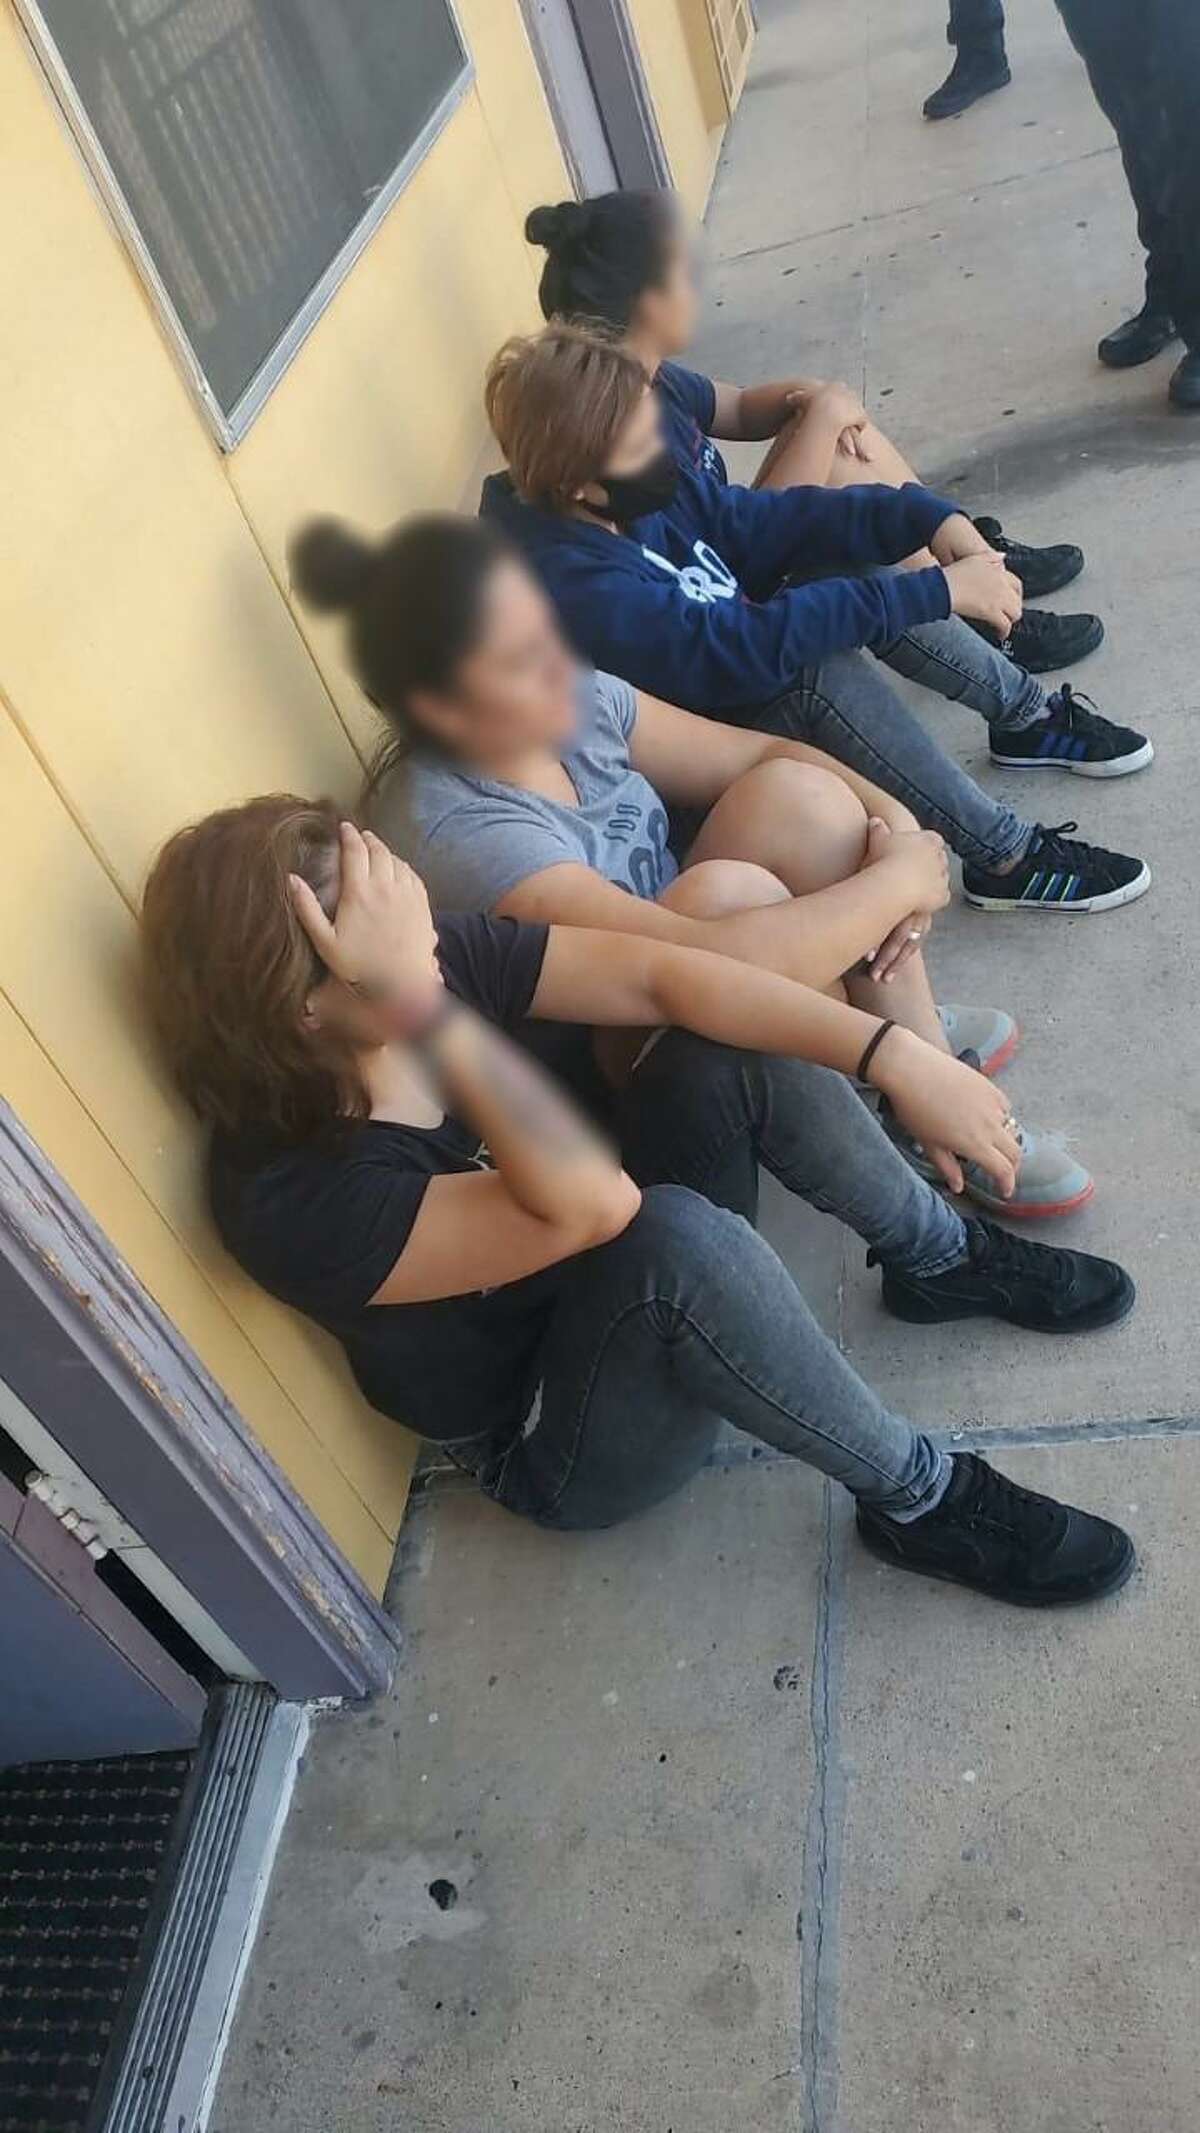 U.S. Border Patrol agents and Laredo police officers discovered a total of 13 immigrants inside two rooms of a local motel along San Bernardo Avenue.